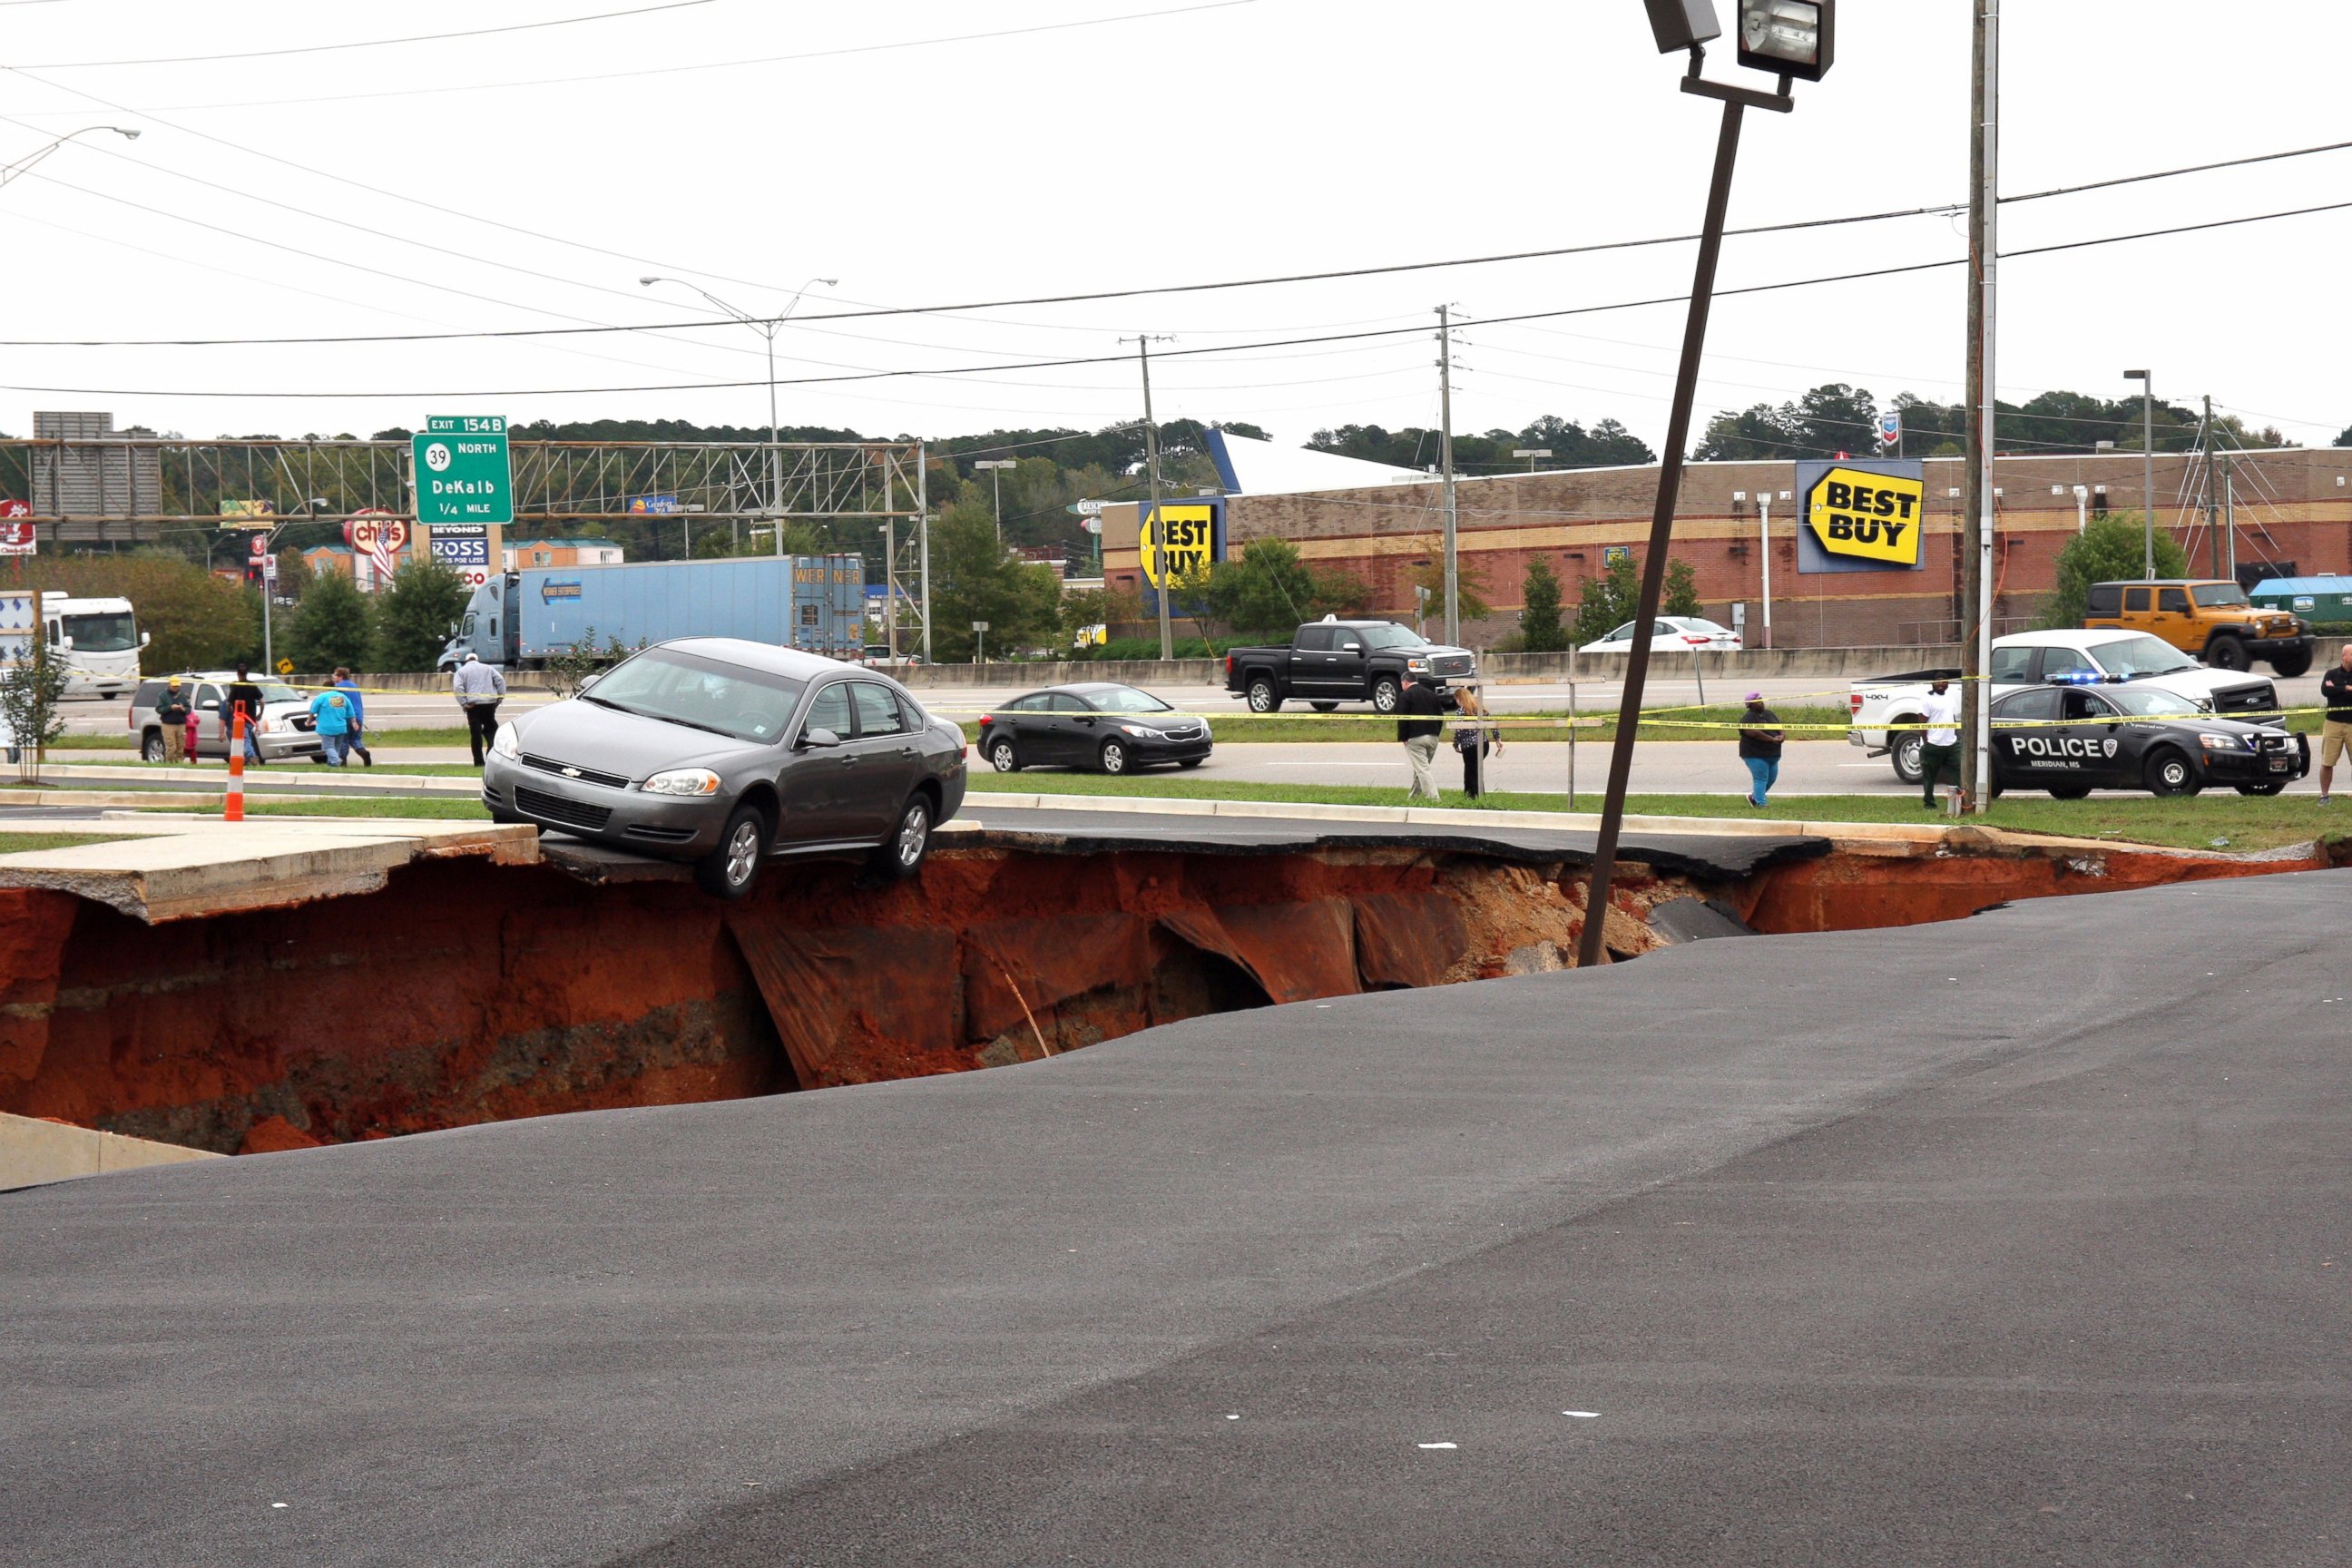 PHOTO: A car teeters on the edge of a cave-in of a parking lot in Meridian, Miss., Sunday, Nov. 8, 2015.